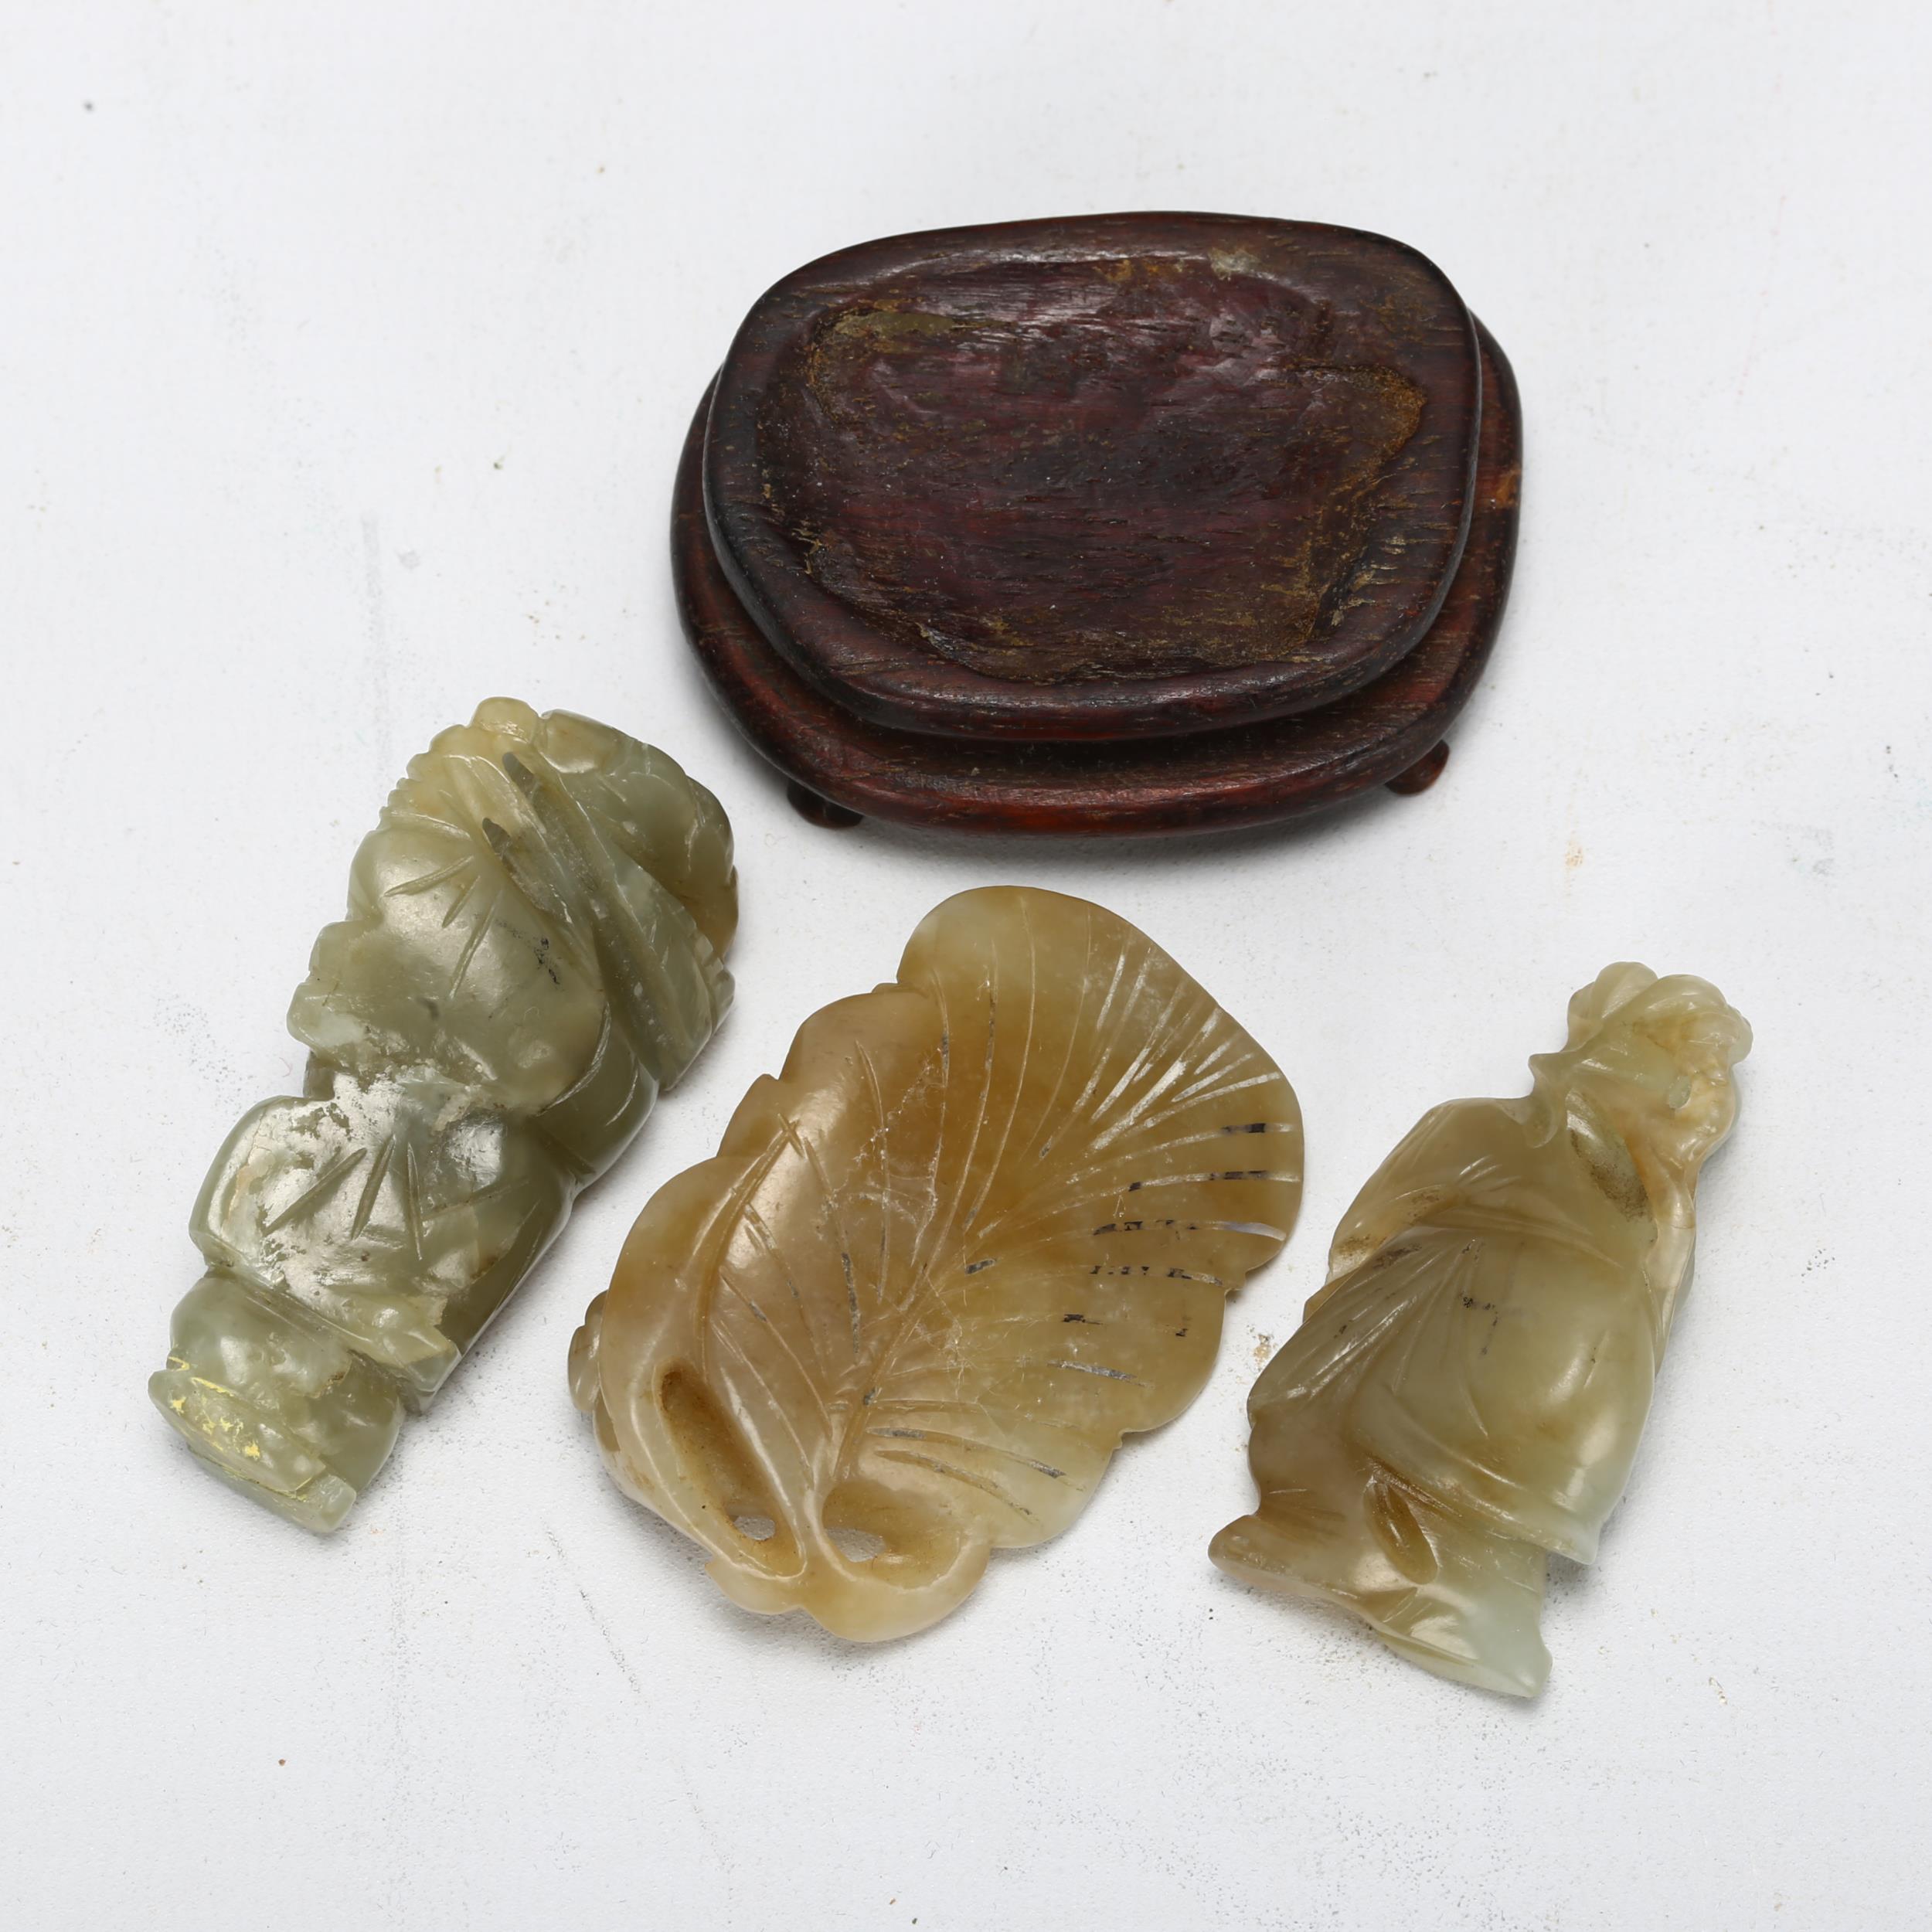 3 Chinese jade figures, 1 on wooden stand, largest 5.5cm All in good condition, no chips cracks or - Image 3 of 3